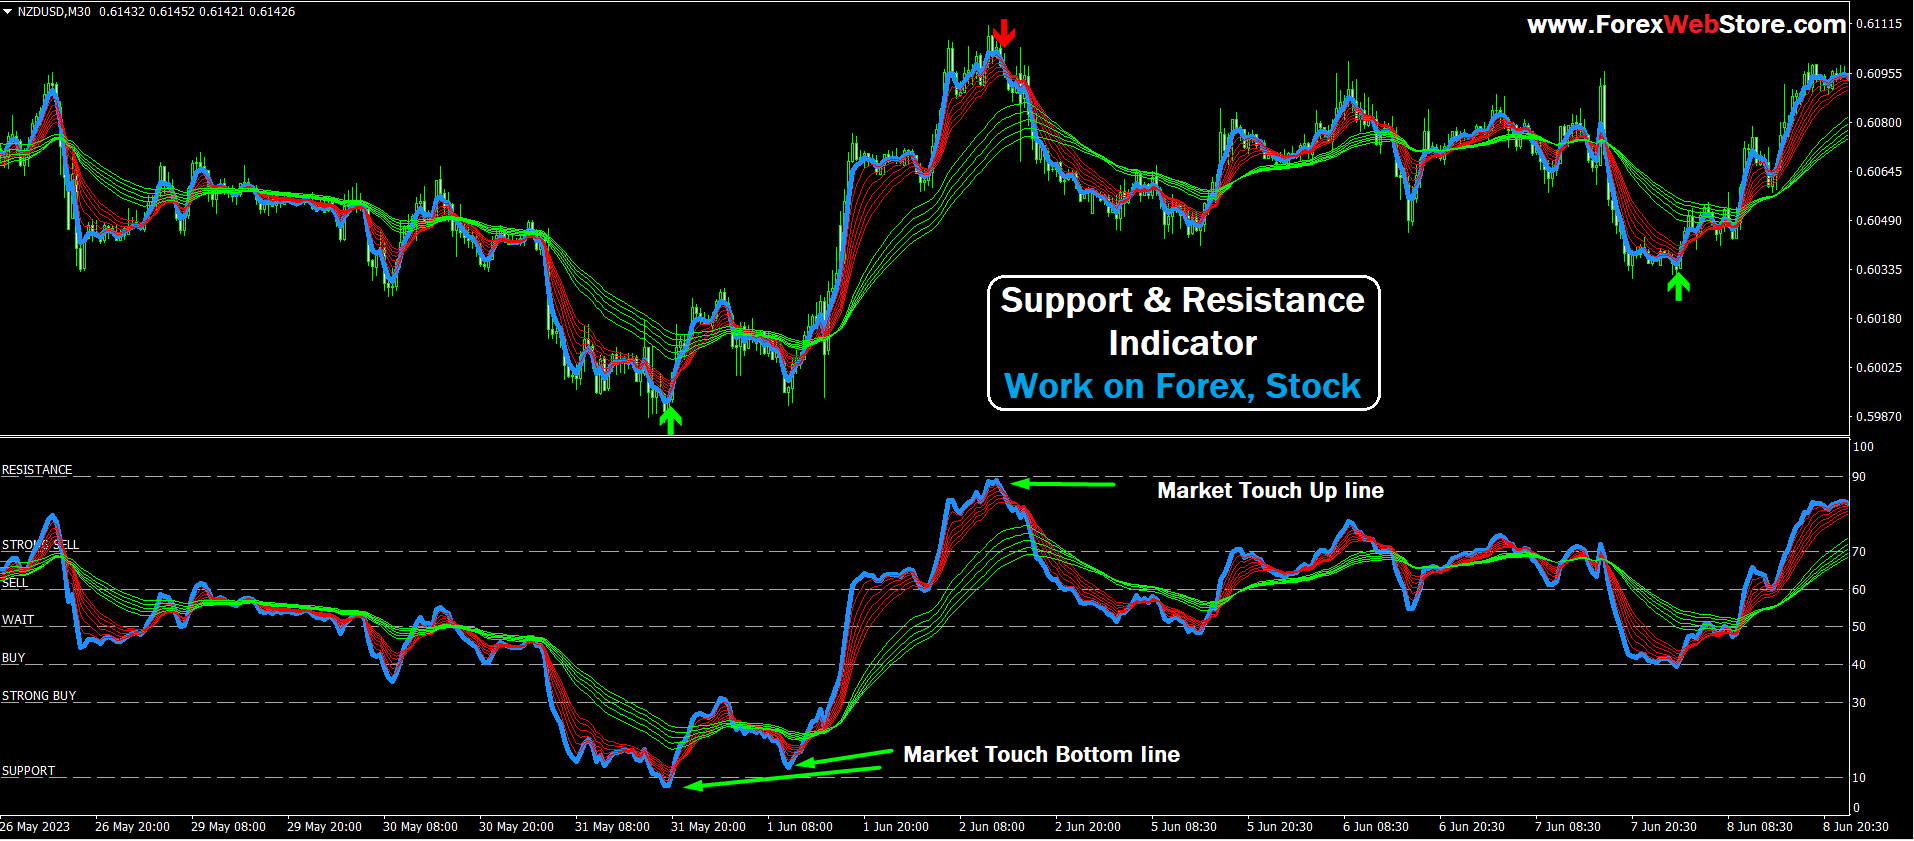 support and resistance indicator